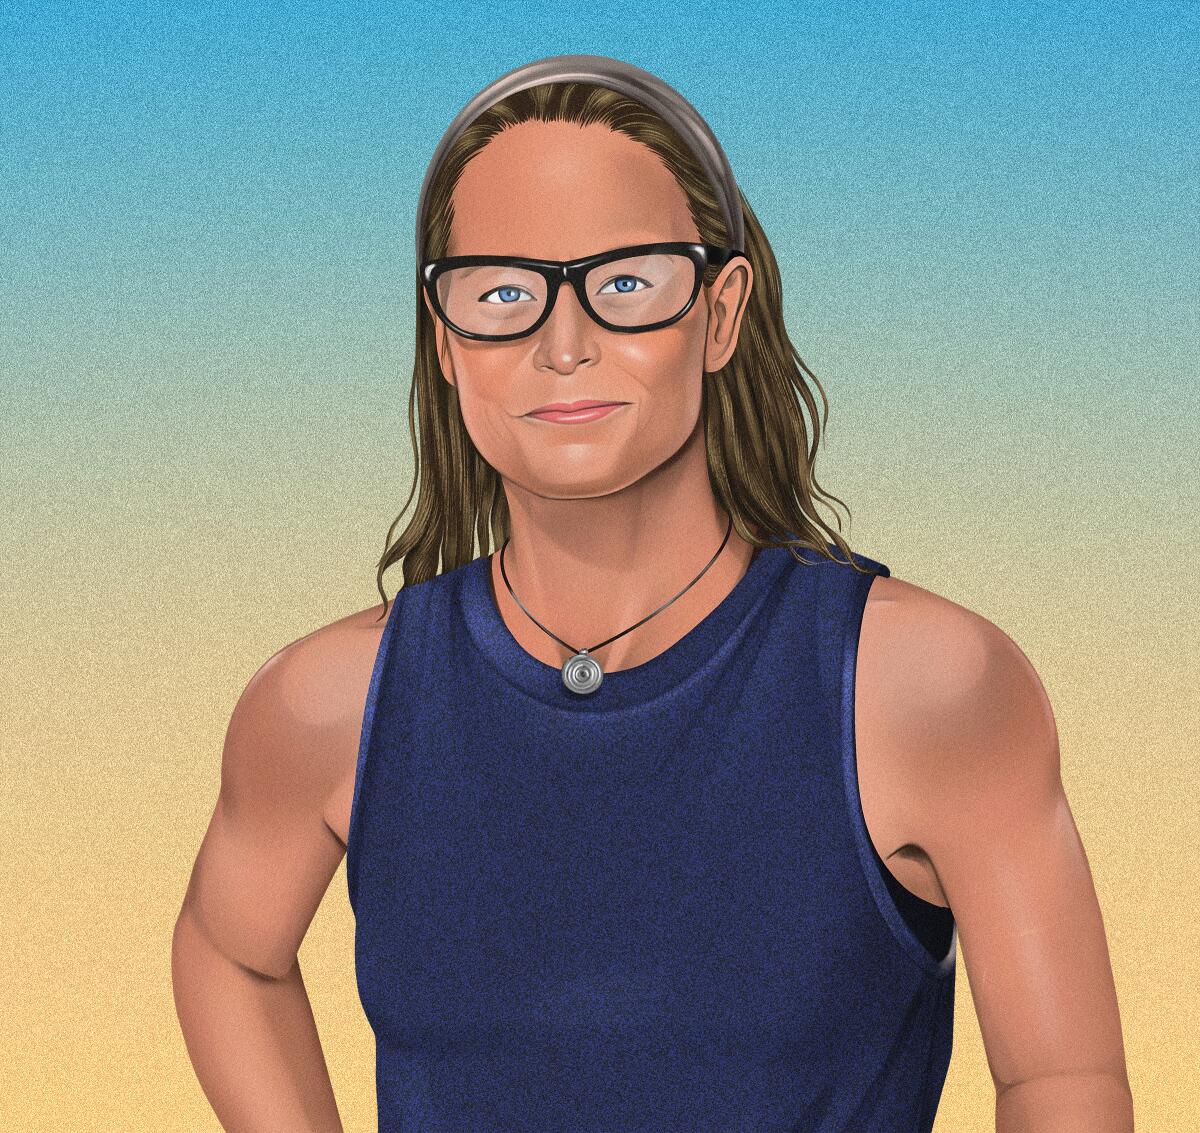 An illustration of Jodie Foster as her "Nyad" character.